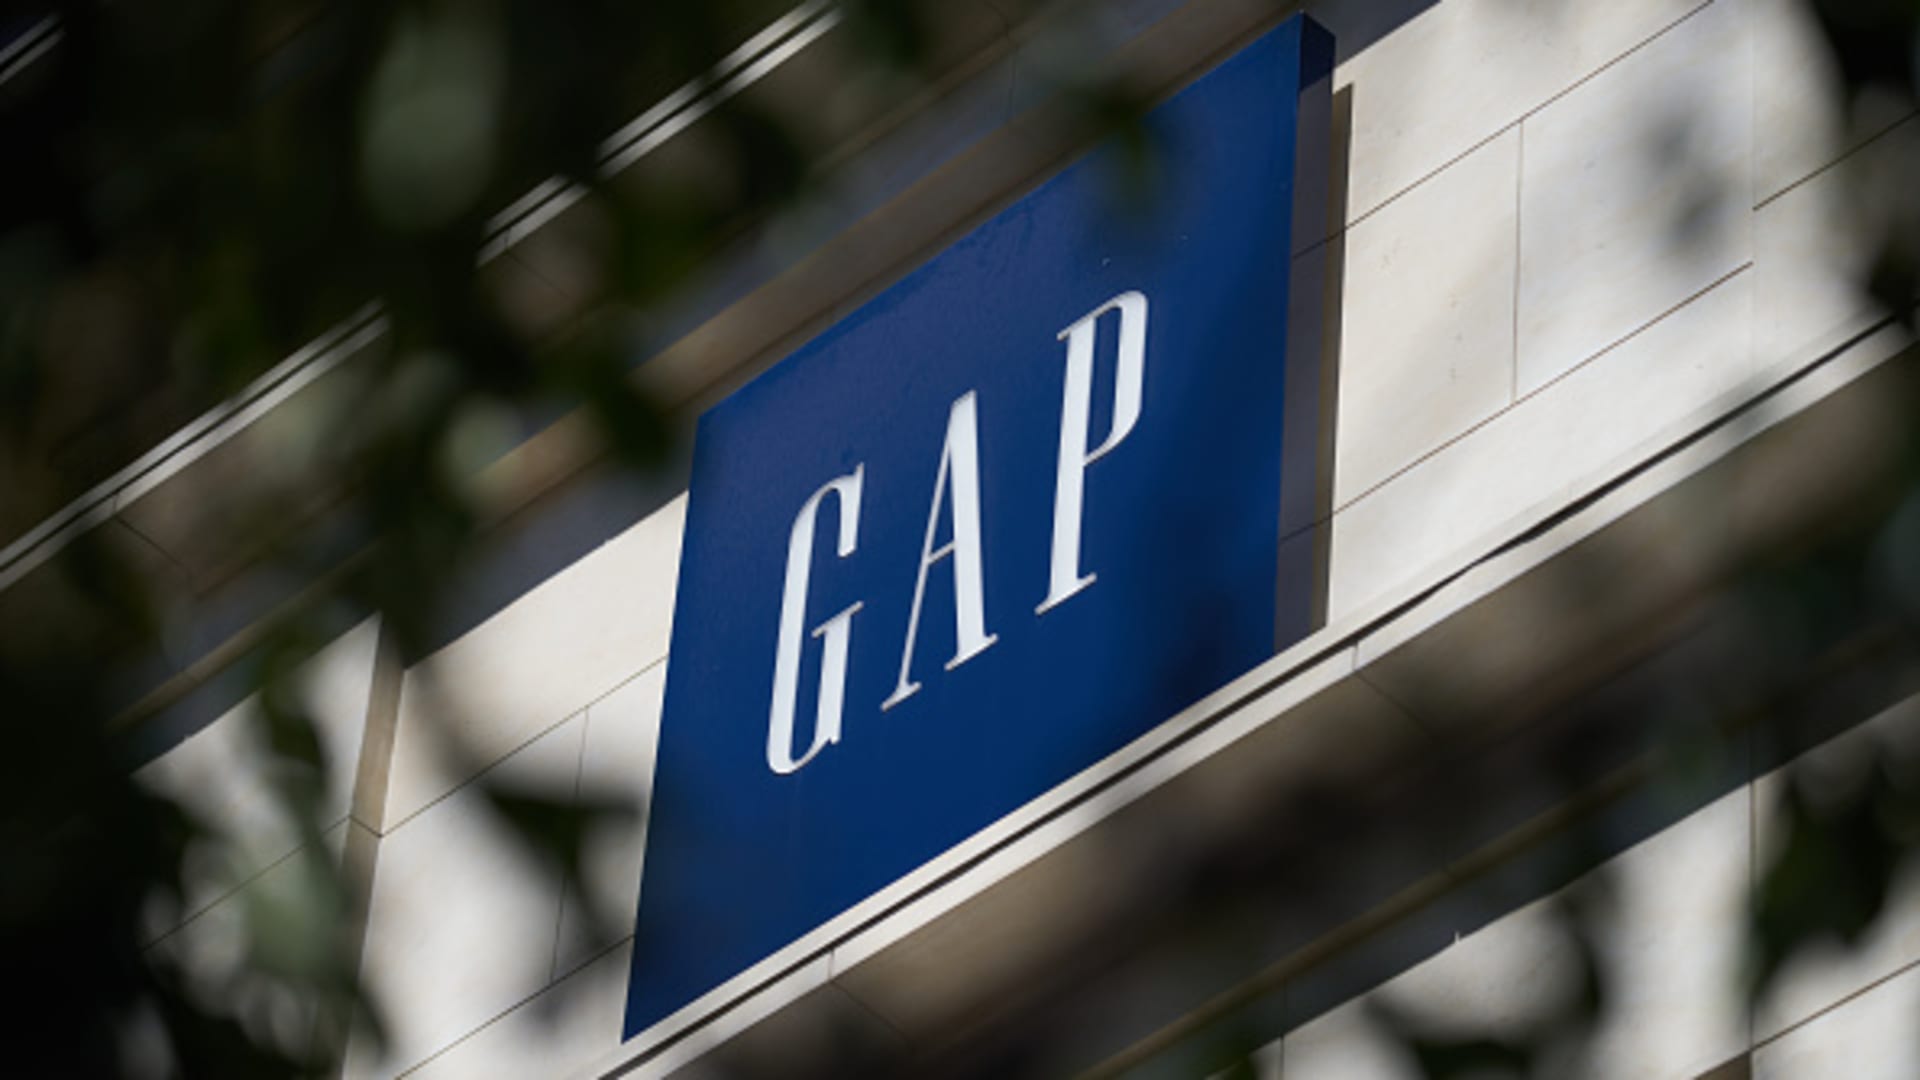 Gap shares soar on sales, earnings beat despite muted holiday forecast against uncertain backdrop